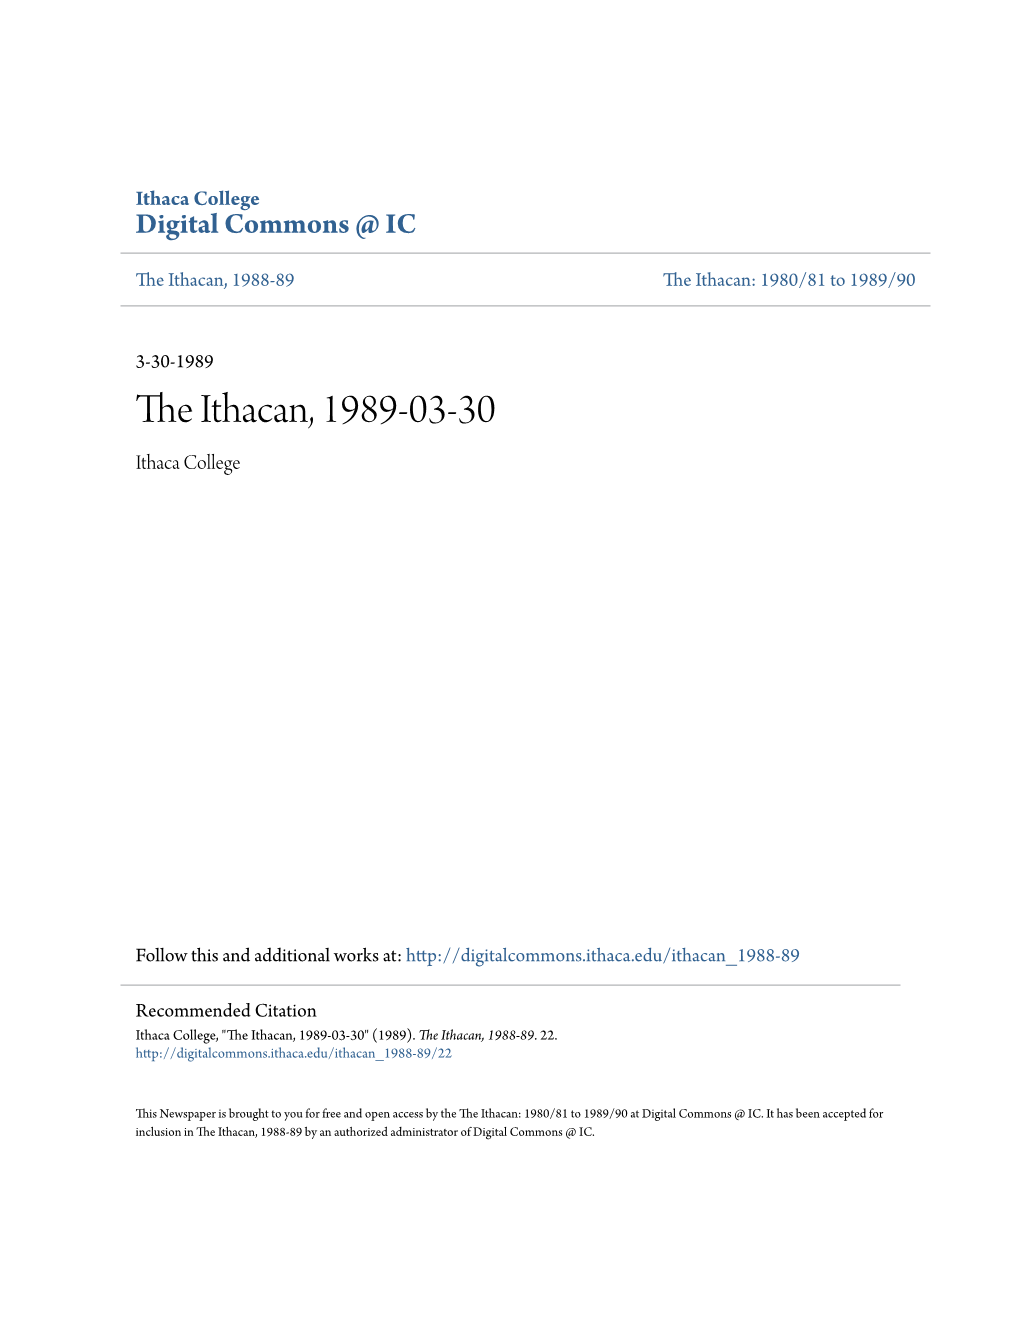 The Ithacan, 1989-03-30